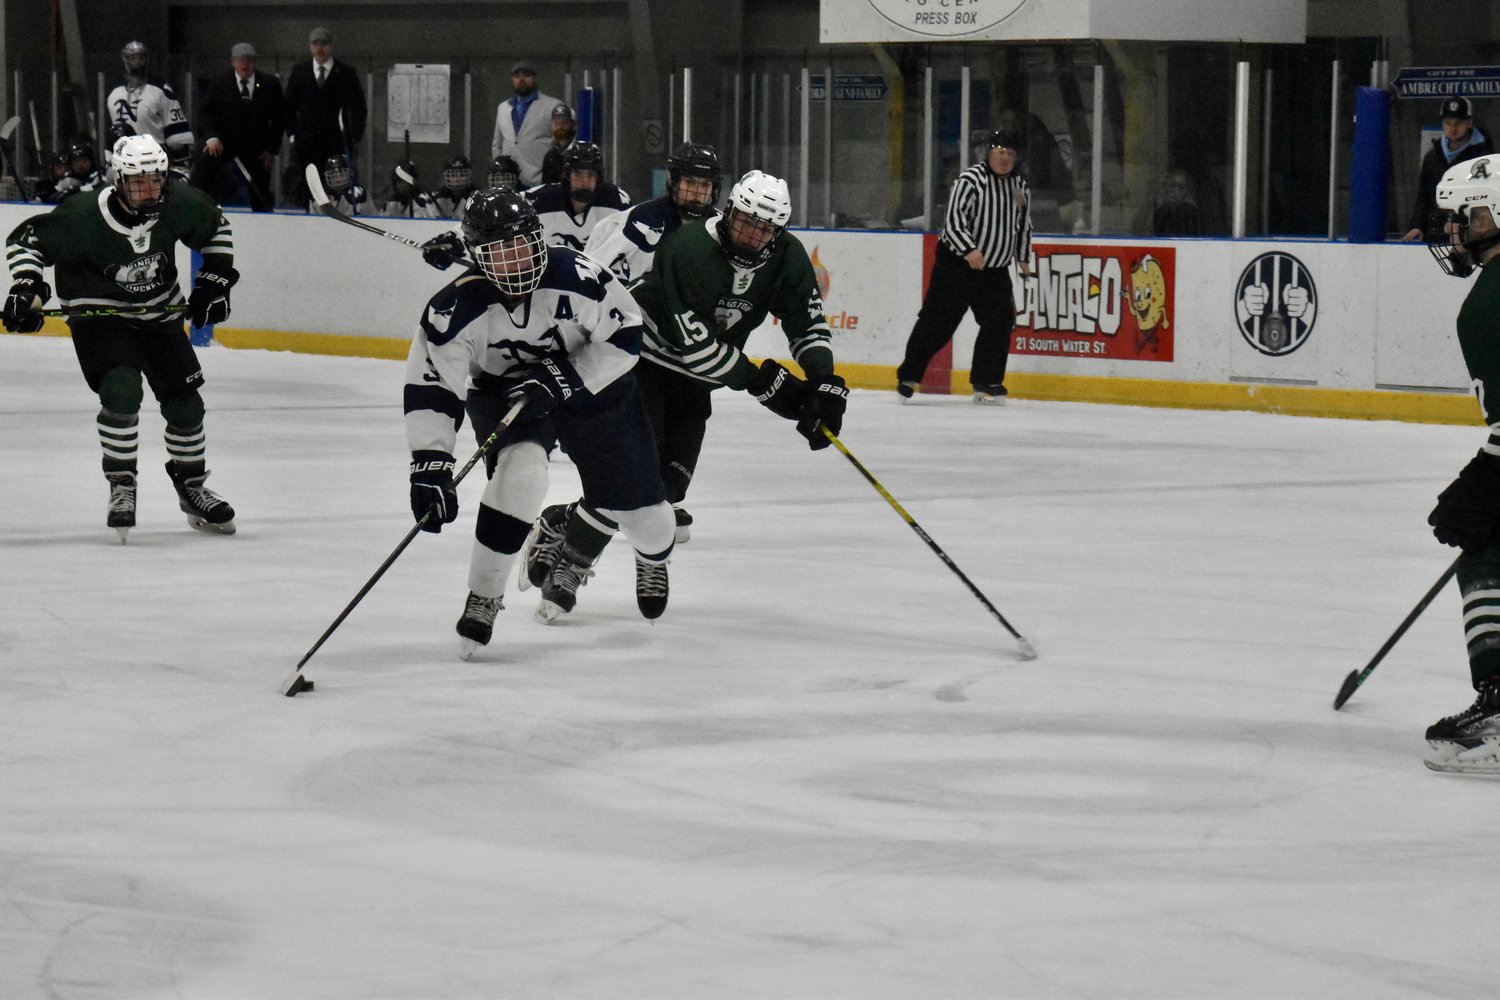 Mike Culkins carries the puck into the offensive end.